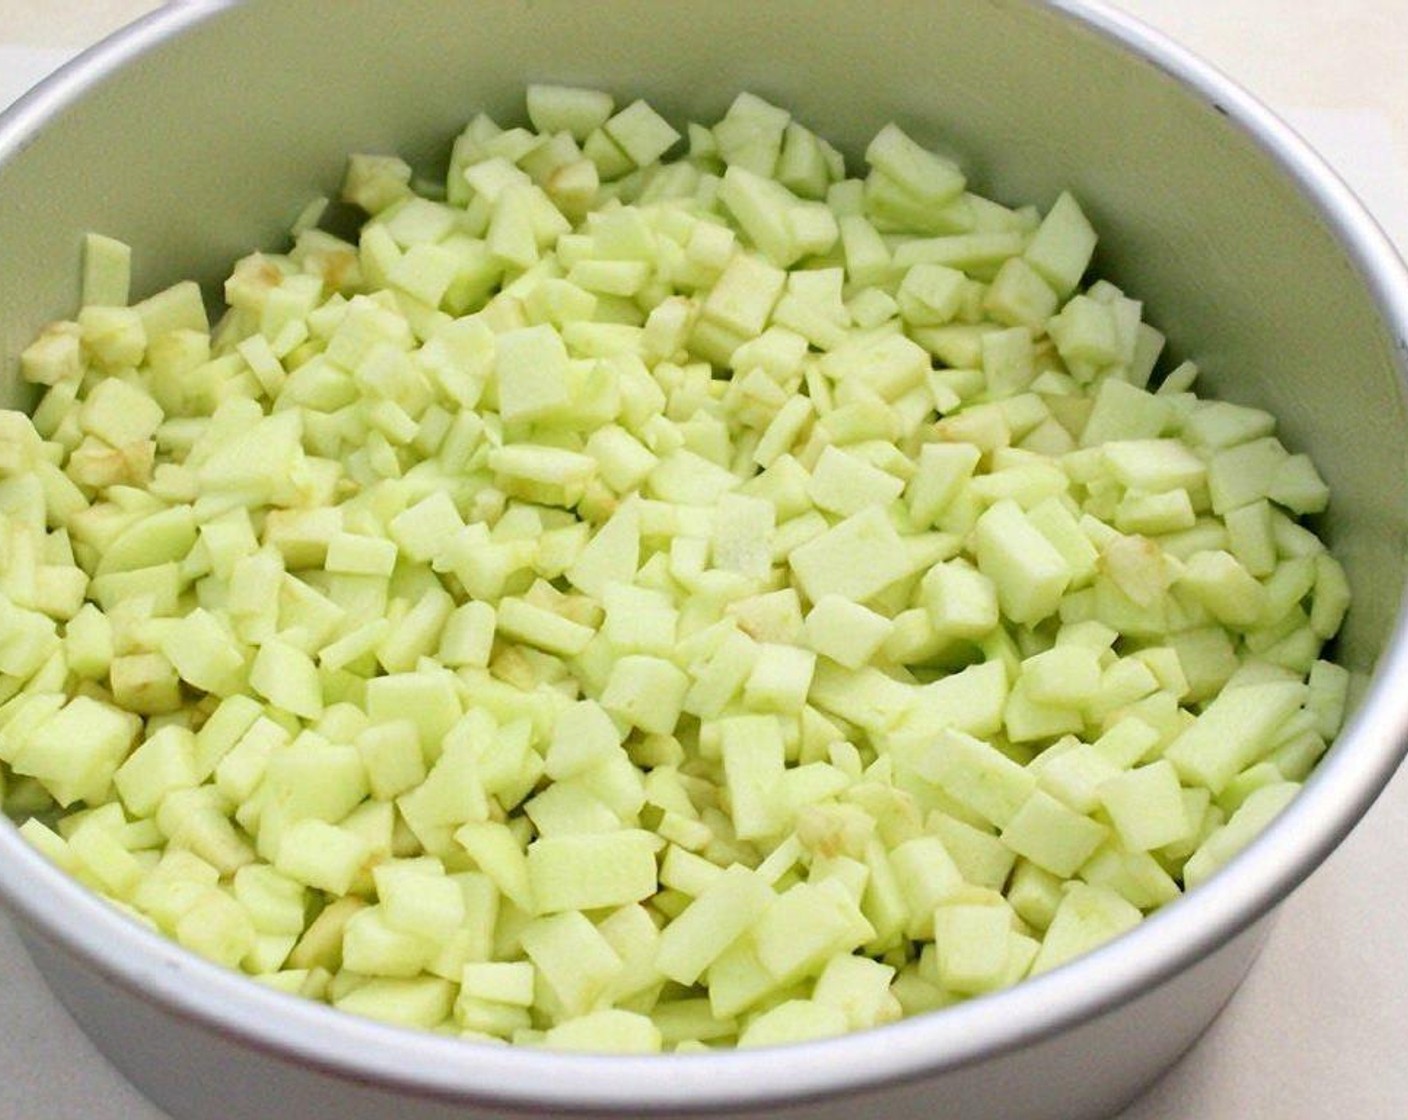 step 6 Meanwhile, peel the Granny Smith Apples (5) and cut into small, thin pieces. Add the apples to the prepared cake pan.